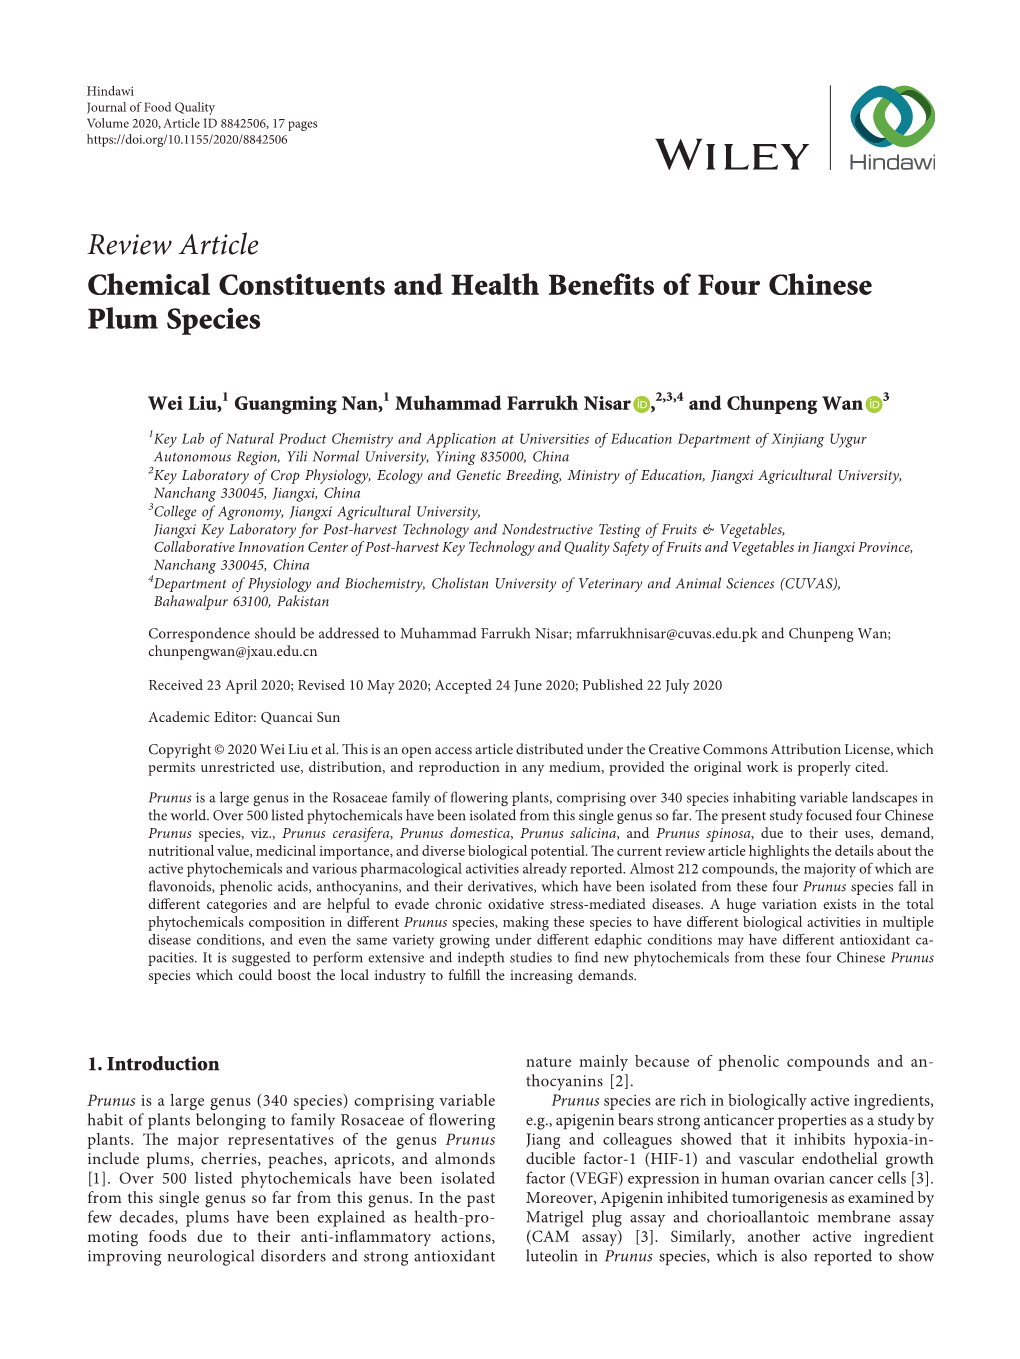 Chemical Constituents and Health Benefits of Four Chinese Plum Species